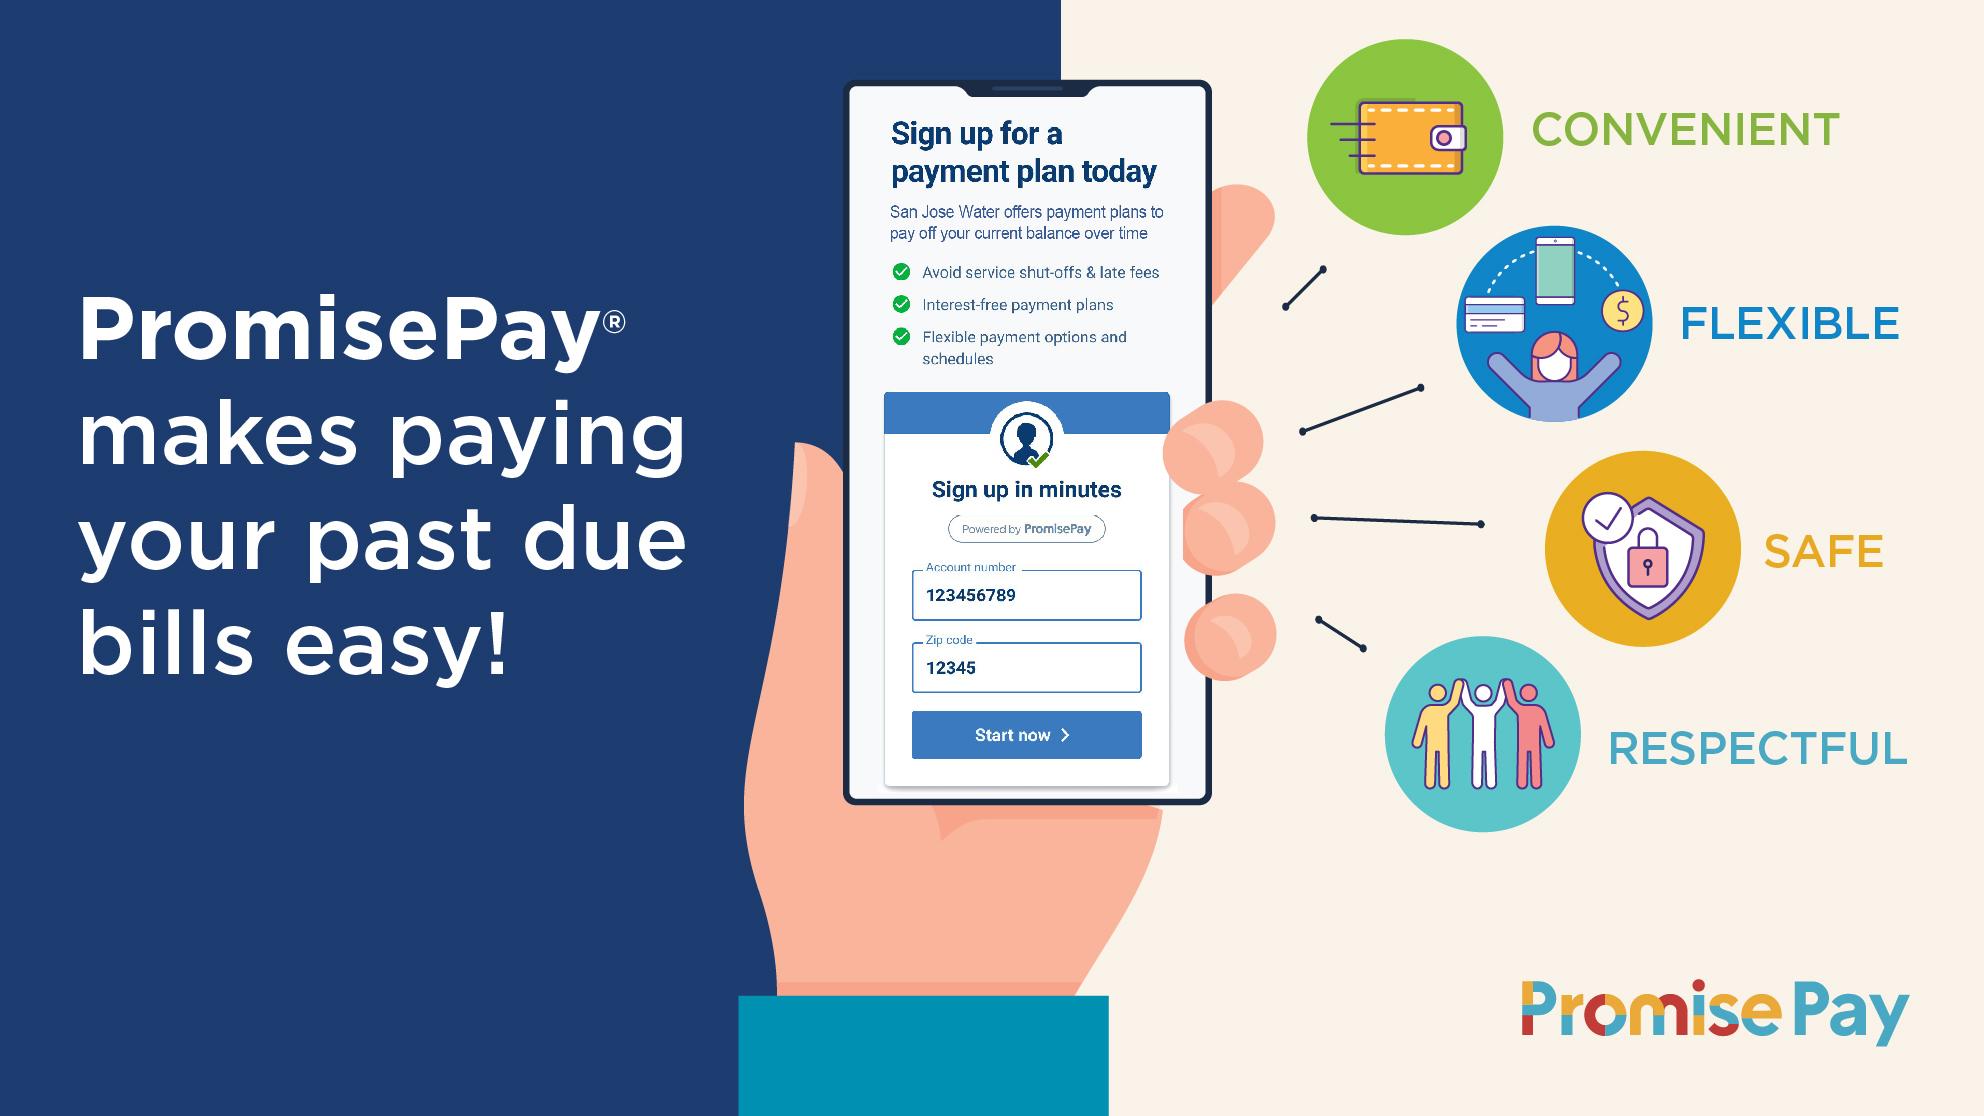 PromisePay makes paying your past due bills easy! Graphic showing phone with PromisePay website on the screen